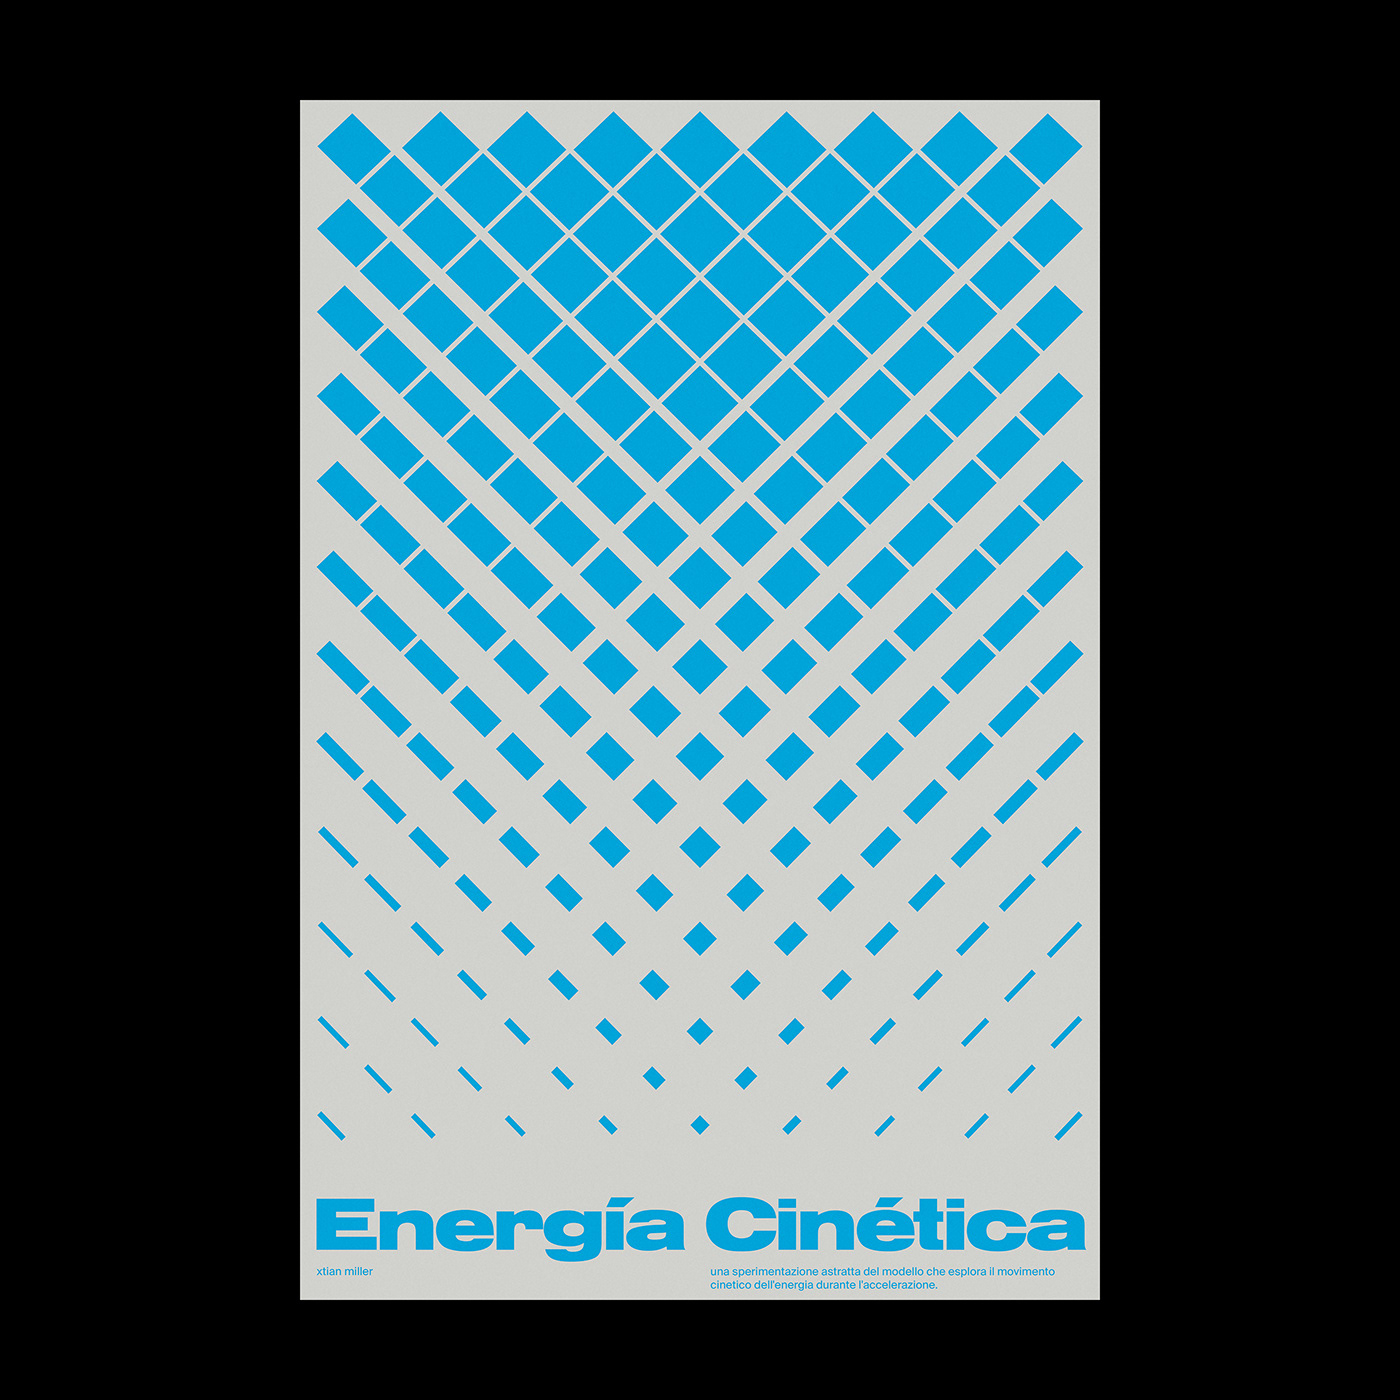 Energia Cinetica poster by Xtian Miller